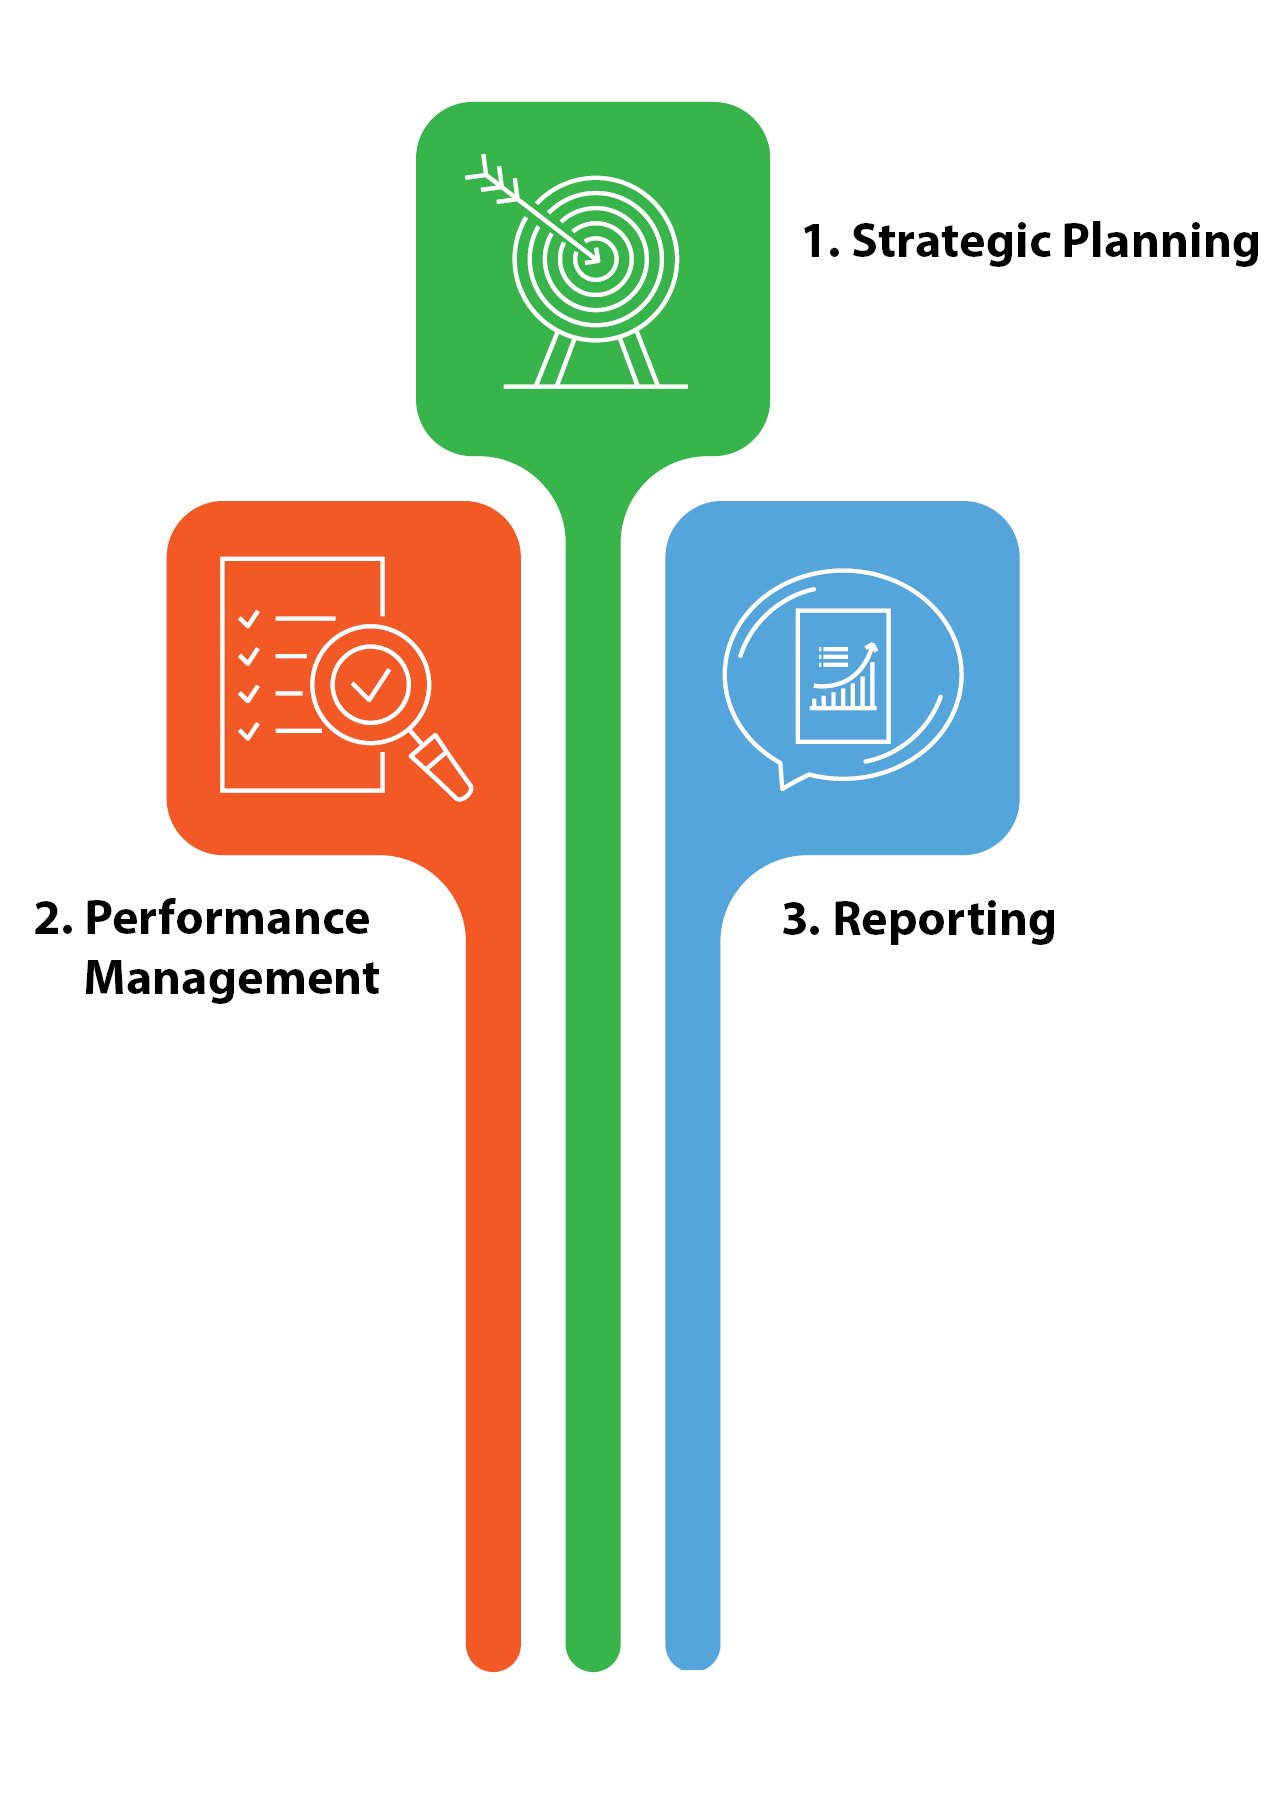 Diagram showing the three key components of Accountability, Strategic Planning, Performance Management and Reporting